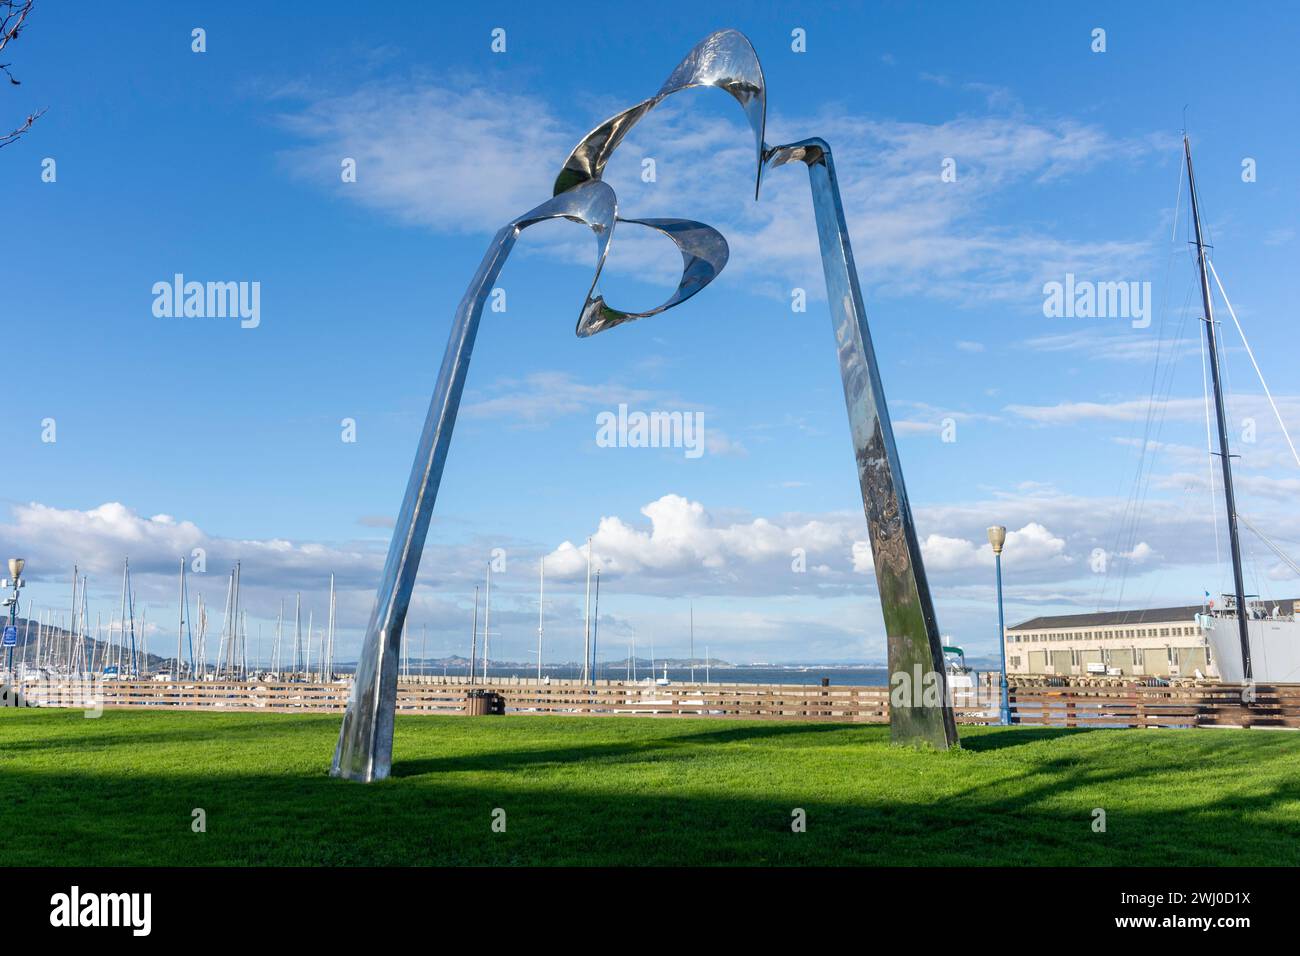 Skygate Sculpture, East Wharf Park, The Embarcadero, Fisherman's Wharf District, San Francisco, California, United States Stock Photo